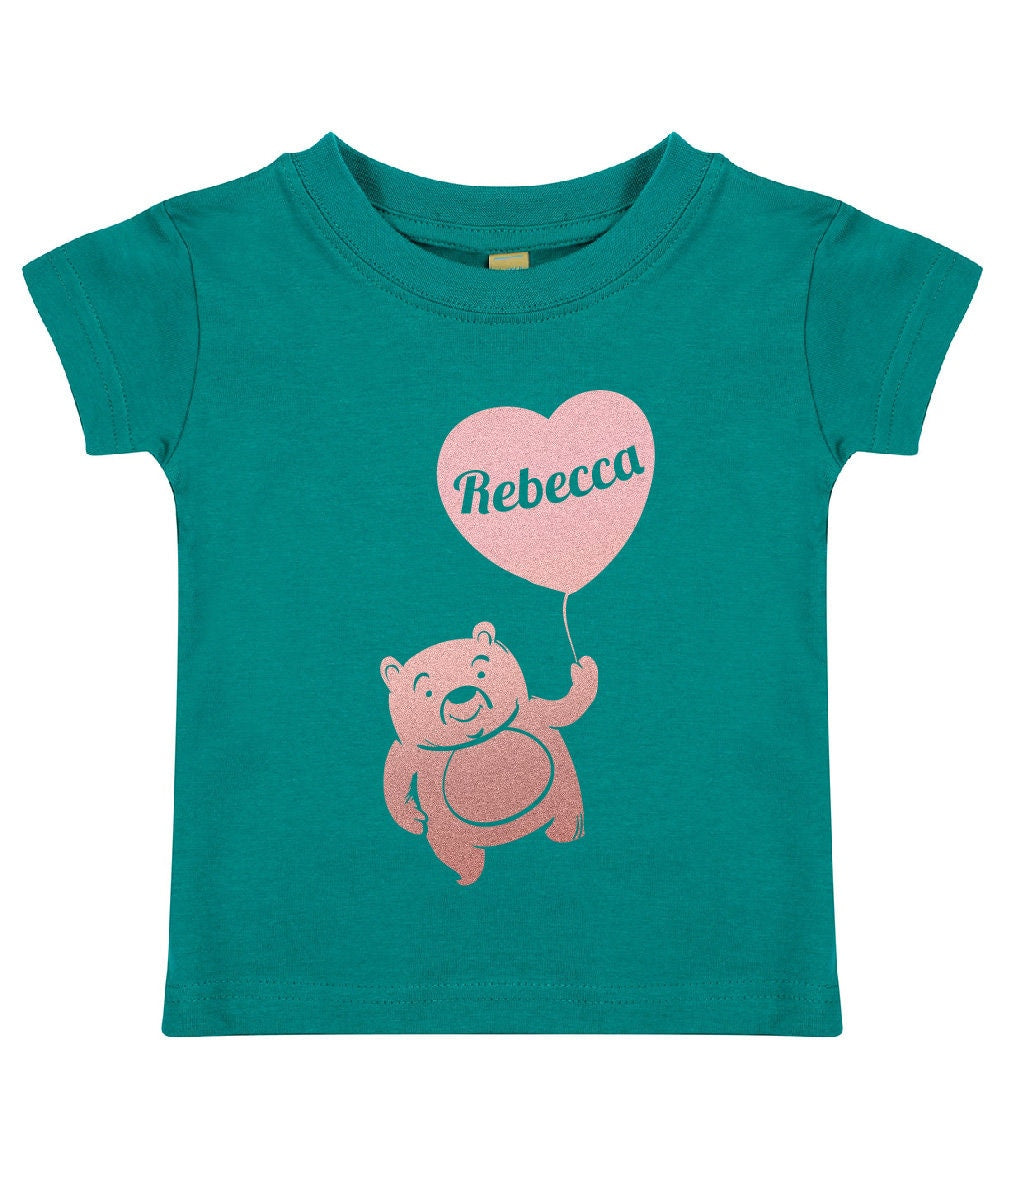 Personalised Rose Gold Print Teddy Bear with Balloon Kids T-Shirt | Personalised Kids Tshirt with Any Name | Heart T-shirt